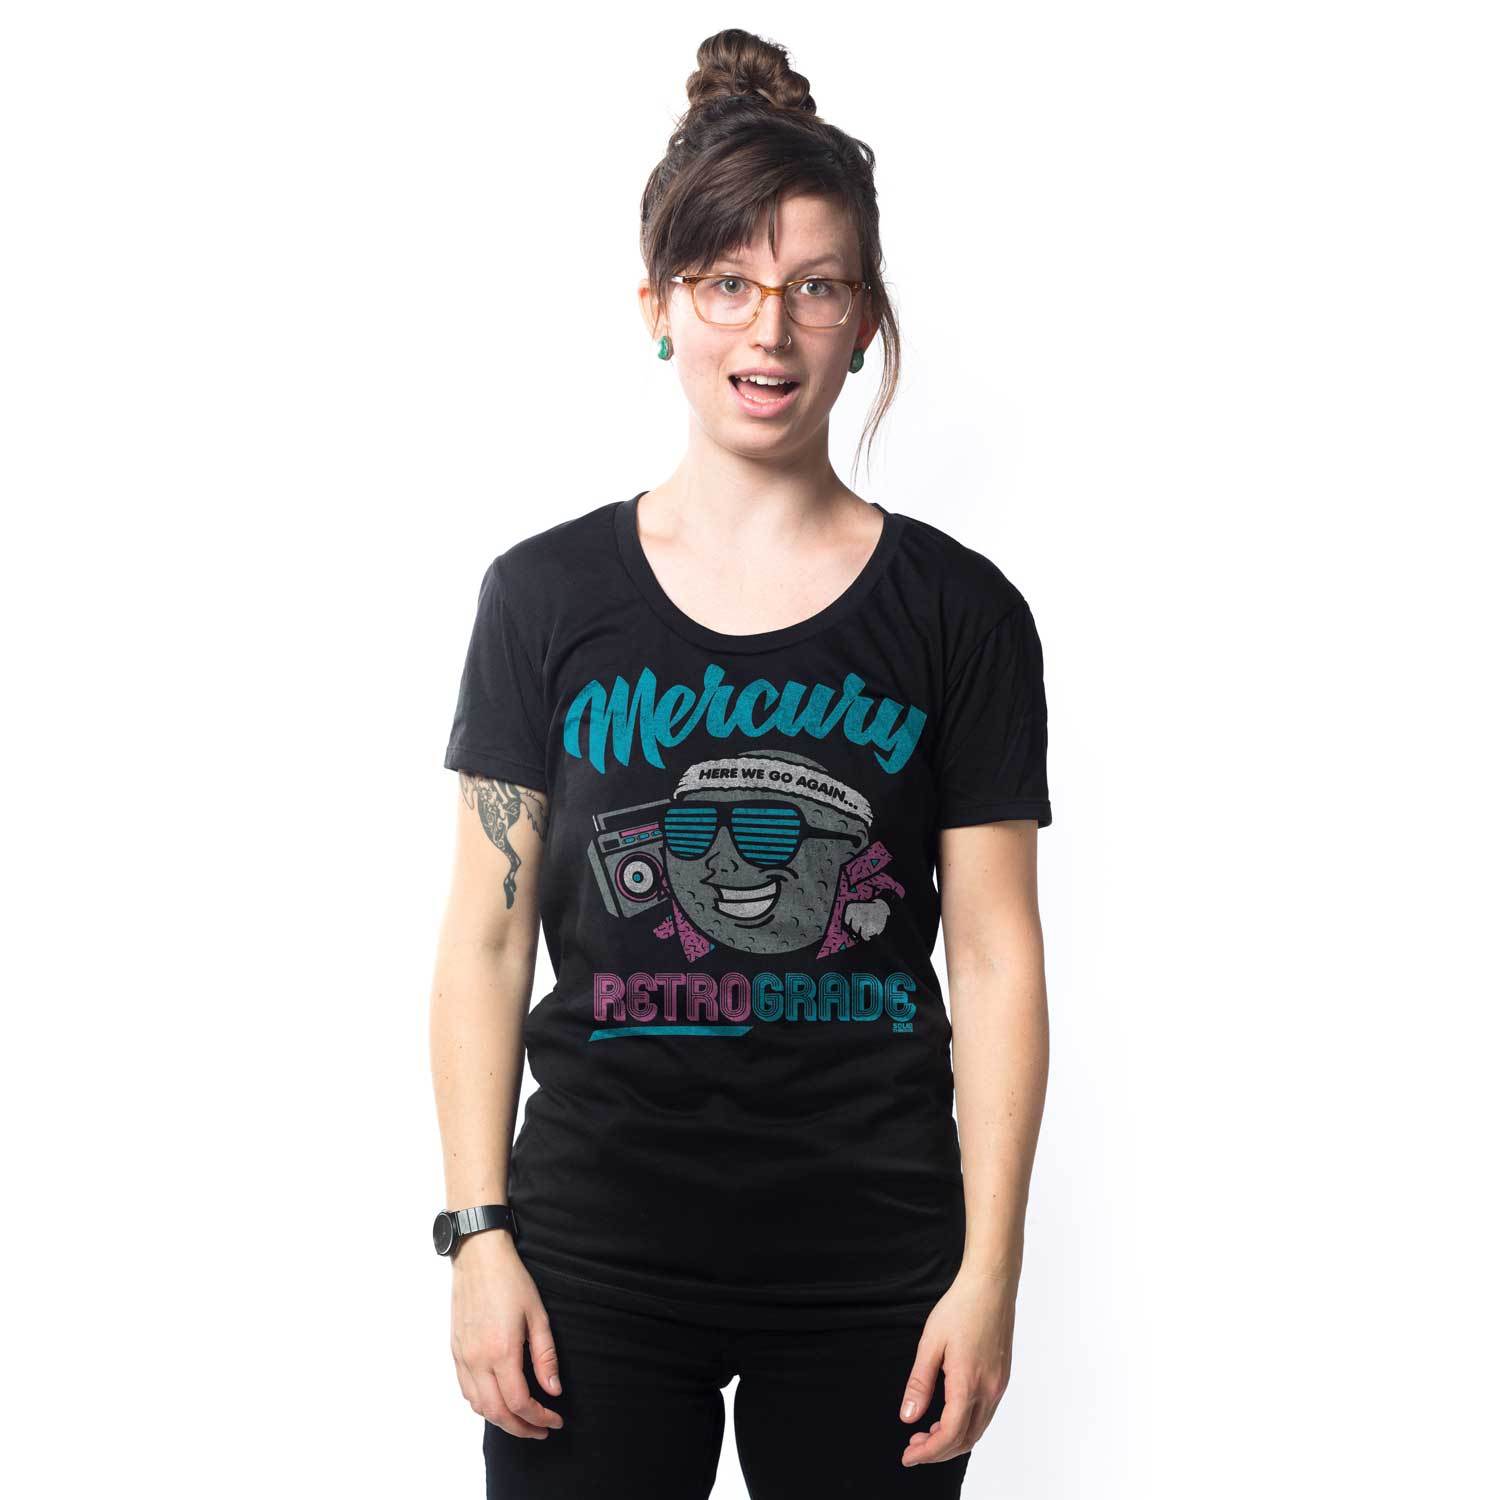 Women's Mercury Retrograde Vintage Inspired Scoopneck T-Shirt | Funny 80s Graphic Tee | Solid Threads